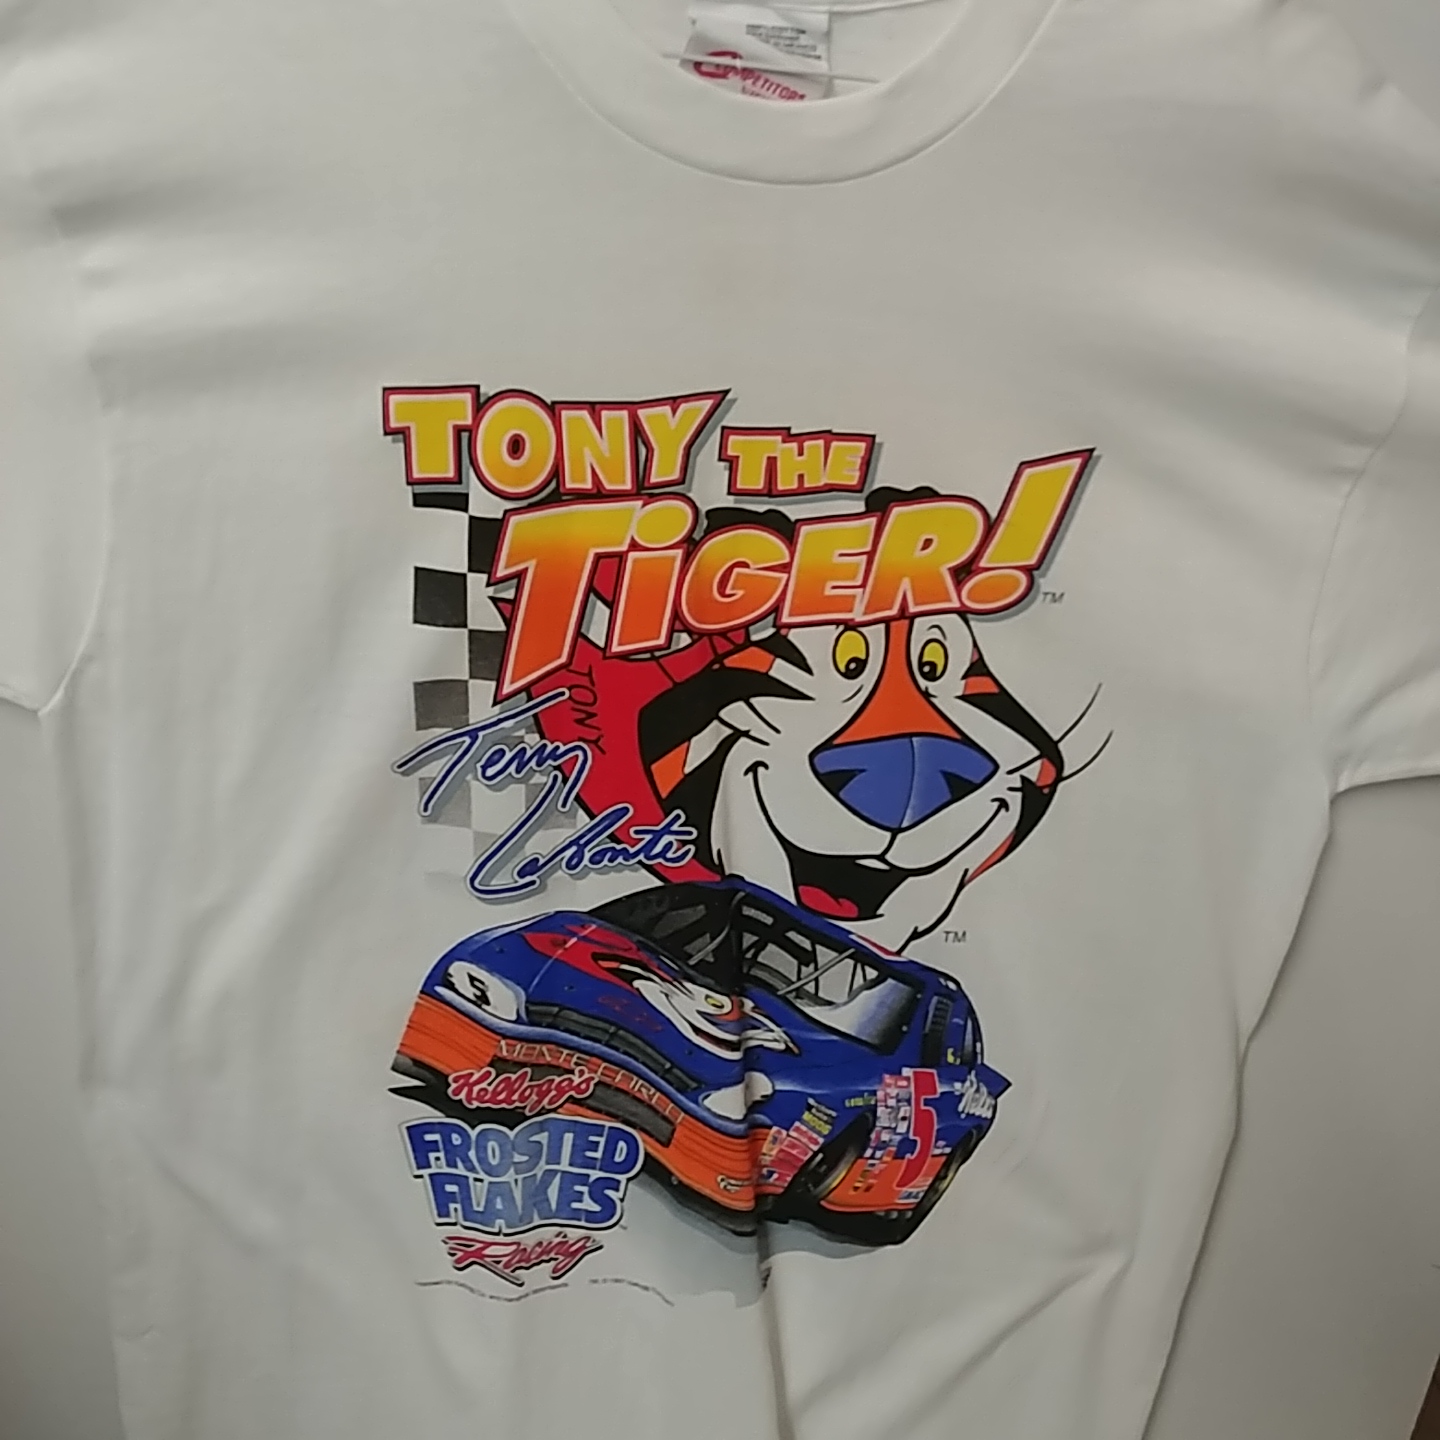 1997 Terry Labonte Kelloggs "Frosted Flakes" tee